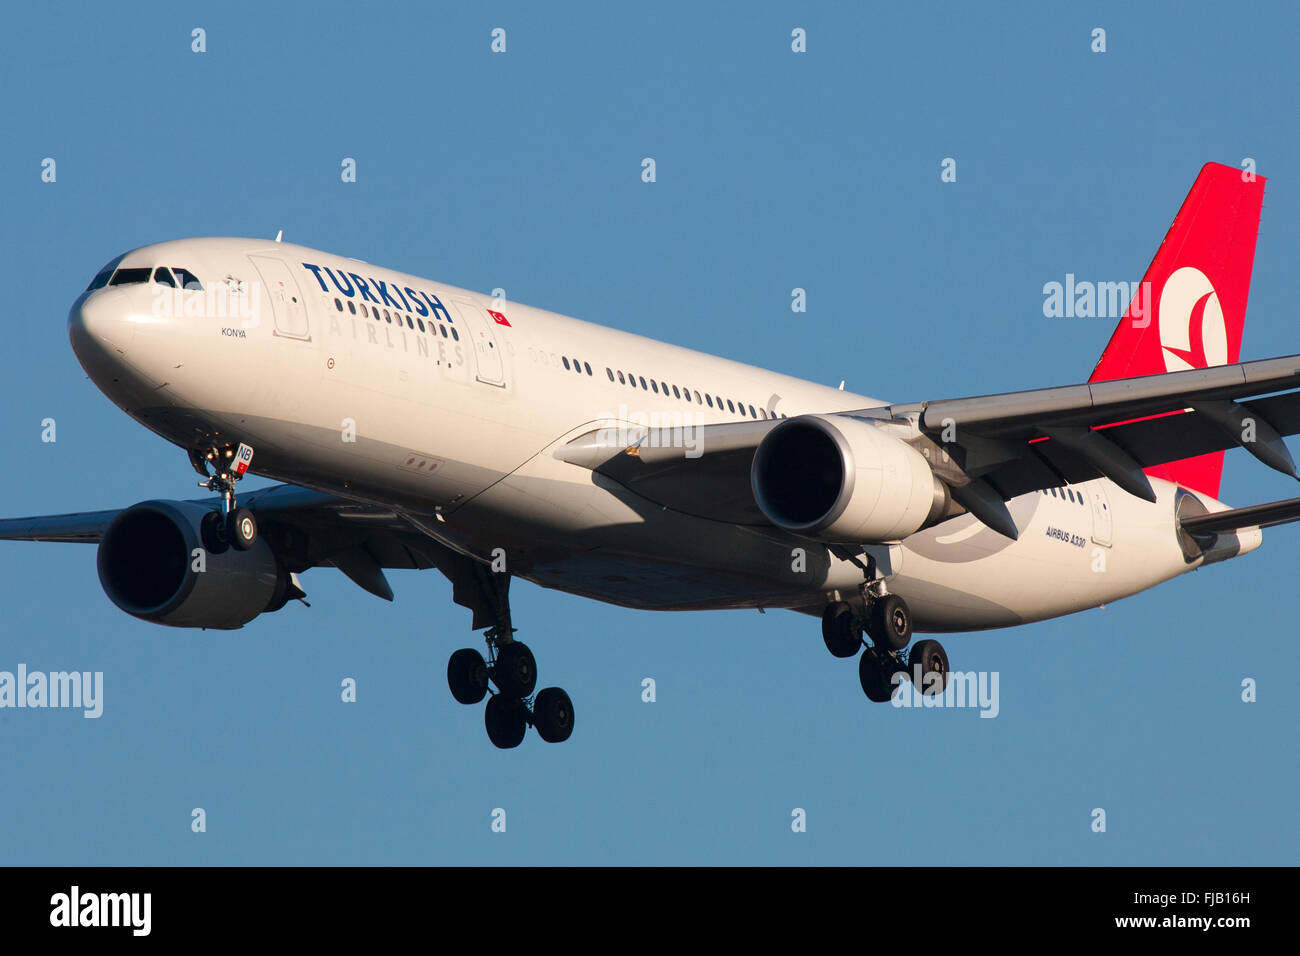 Turkish Airlines Airbus A330 Aircraft Stock Photo